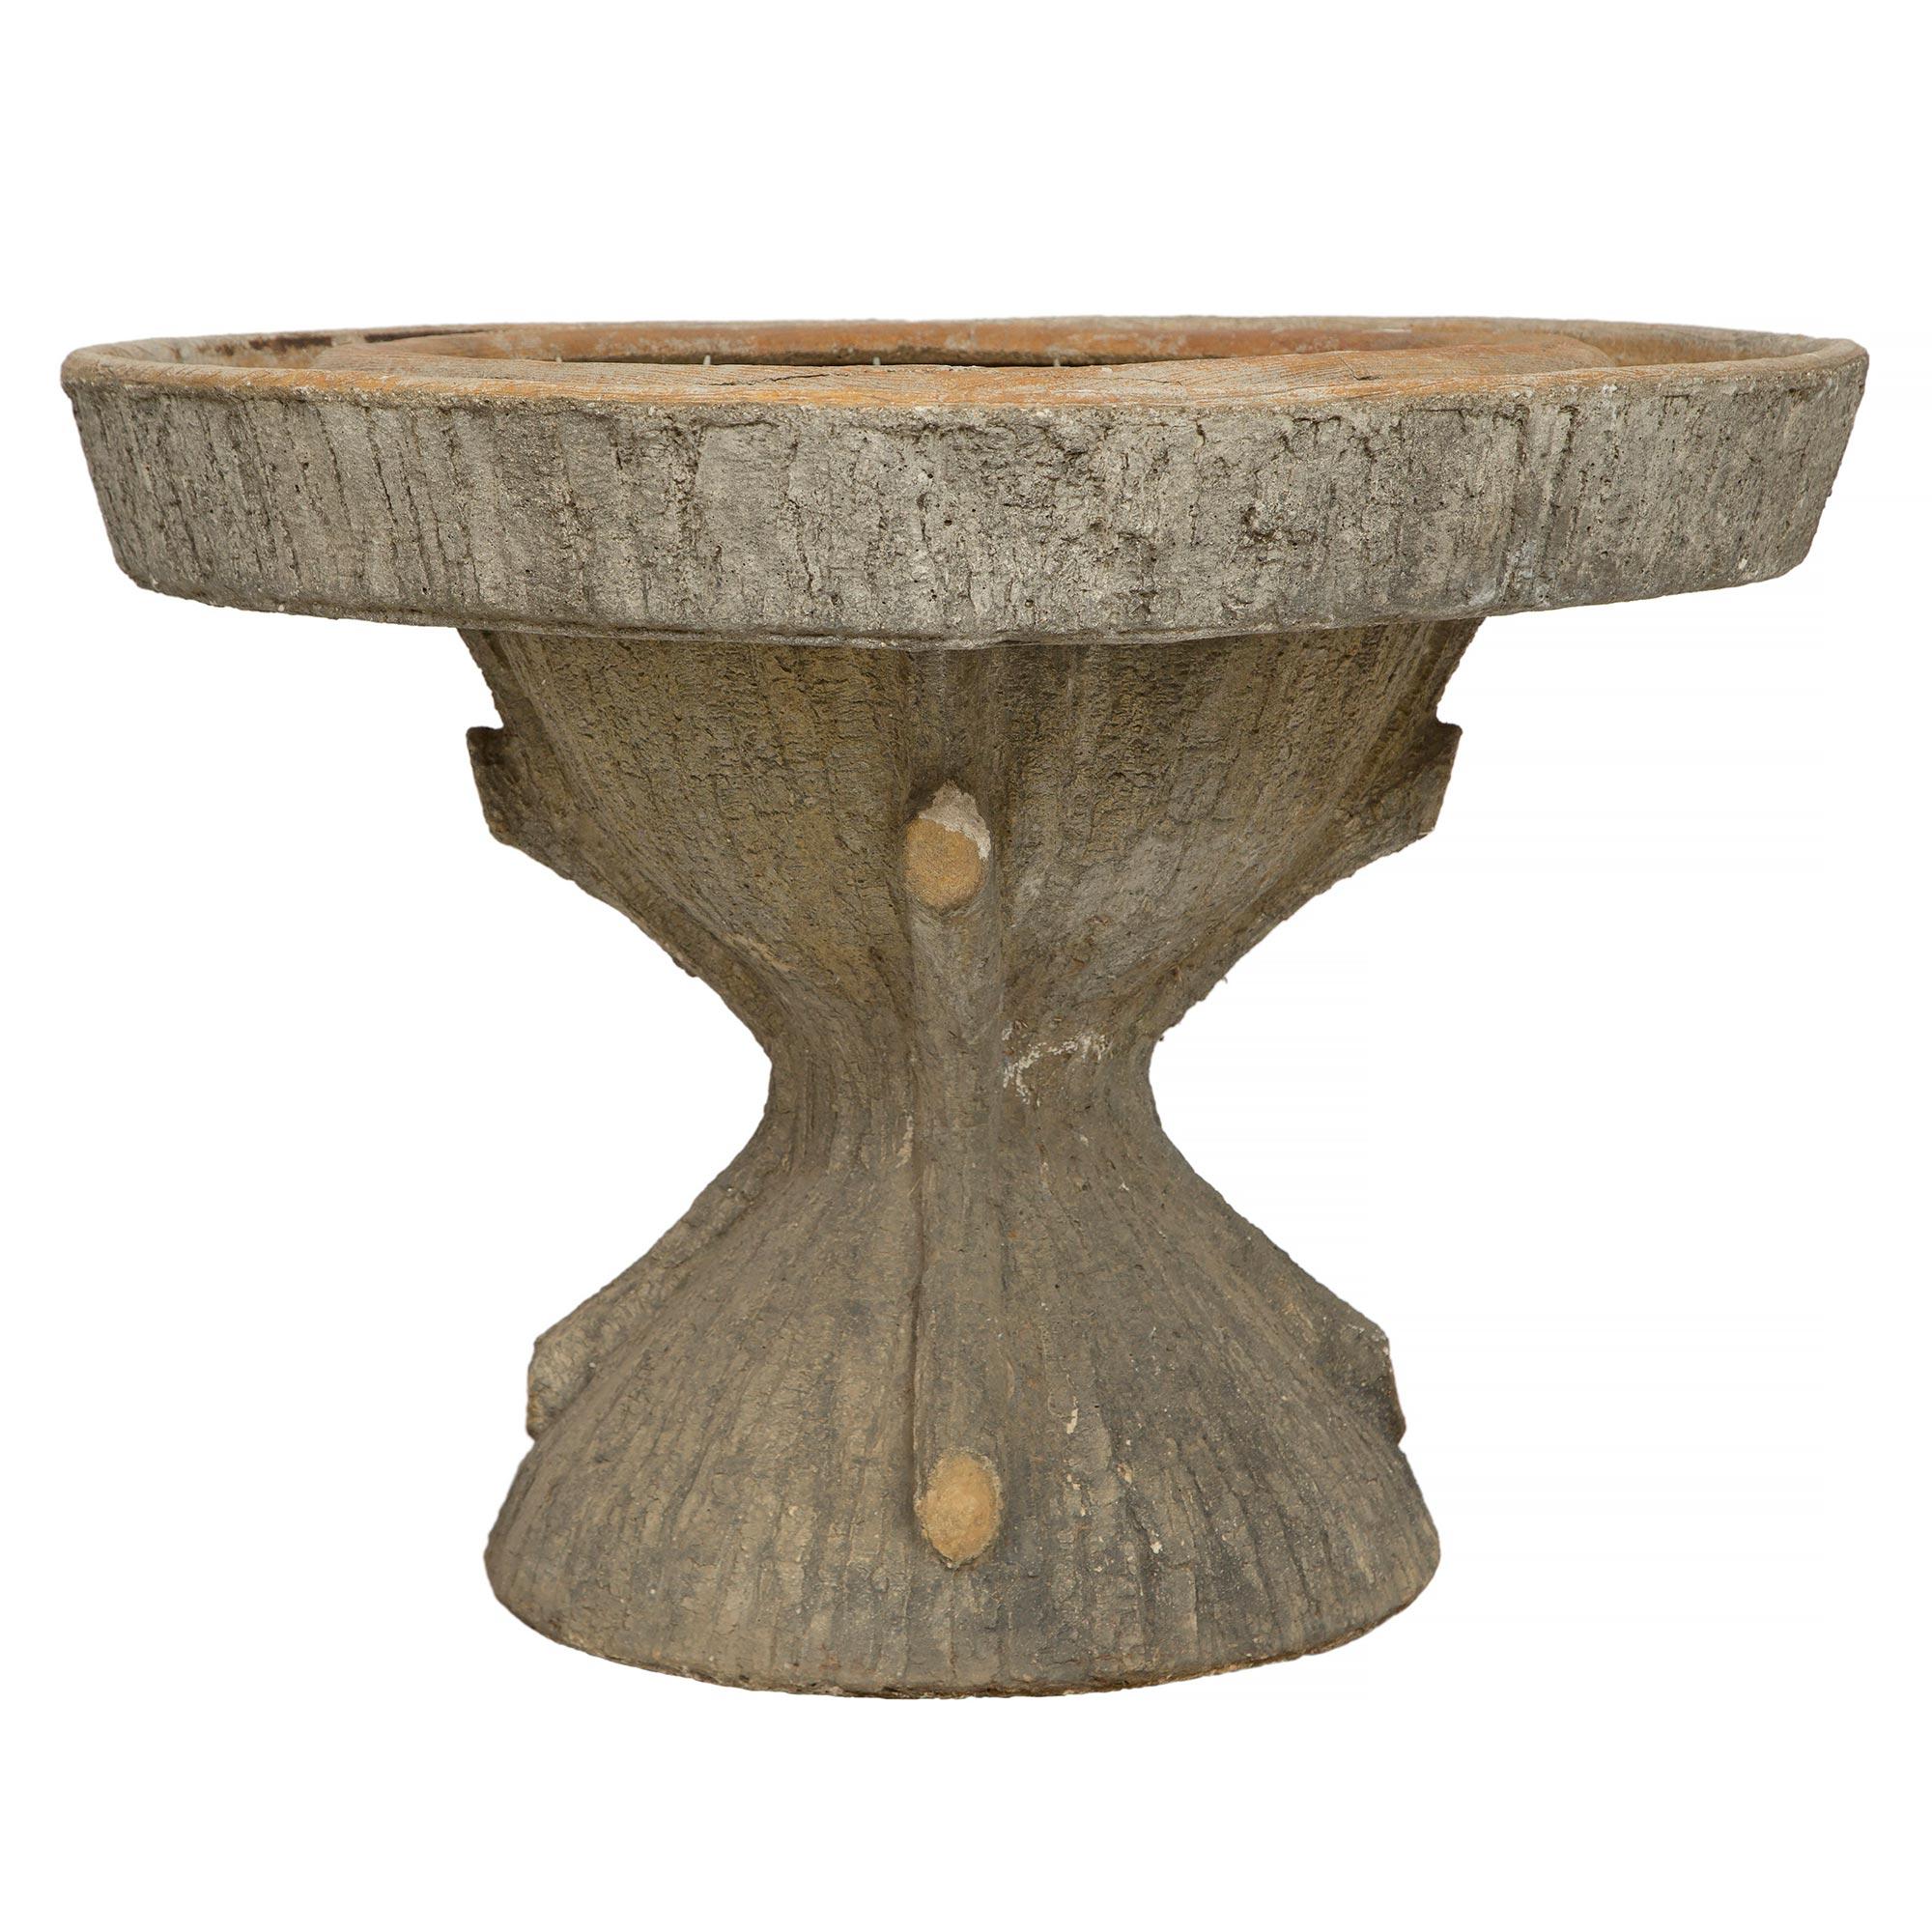 A beautiful French turn of the century Faux Bois fountain planter. This wonderful and unique planter is raised by a most decorative Faux Bois base with charming knots to mimic a tree trunk. Above is a circular planter which extends along the outer